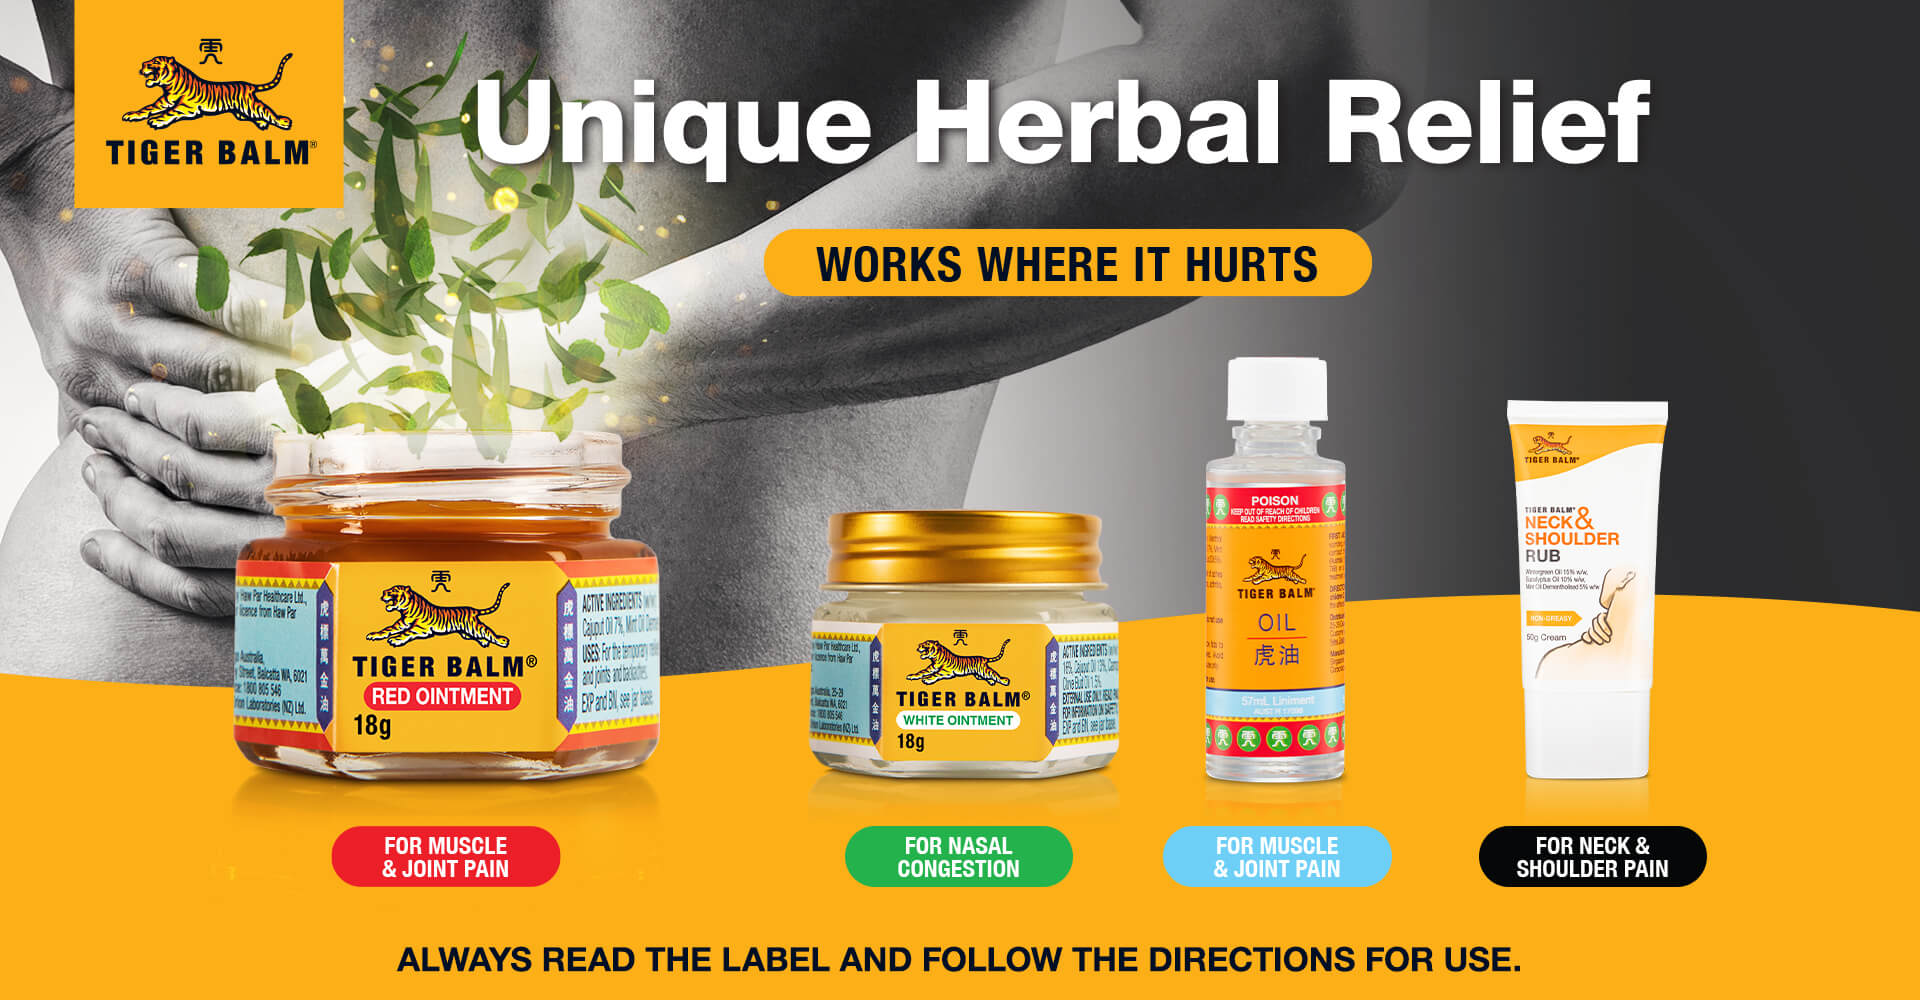 Tiger Balm products